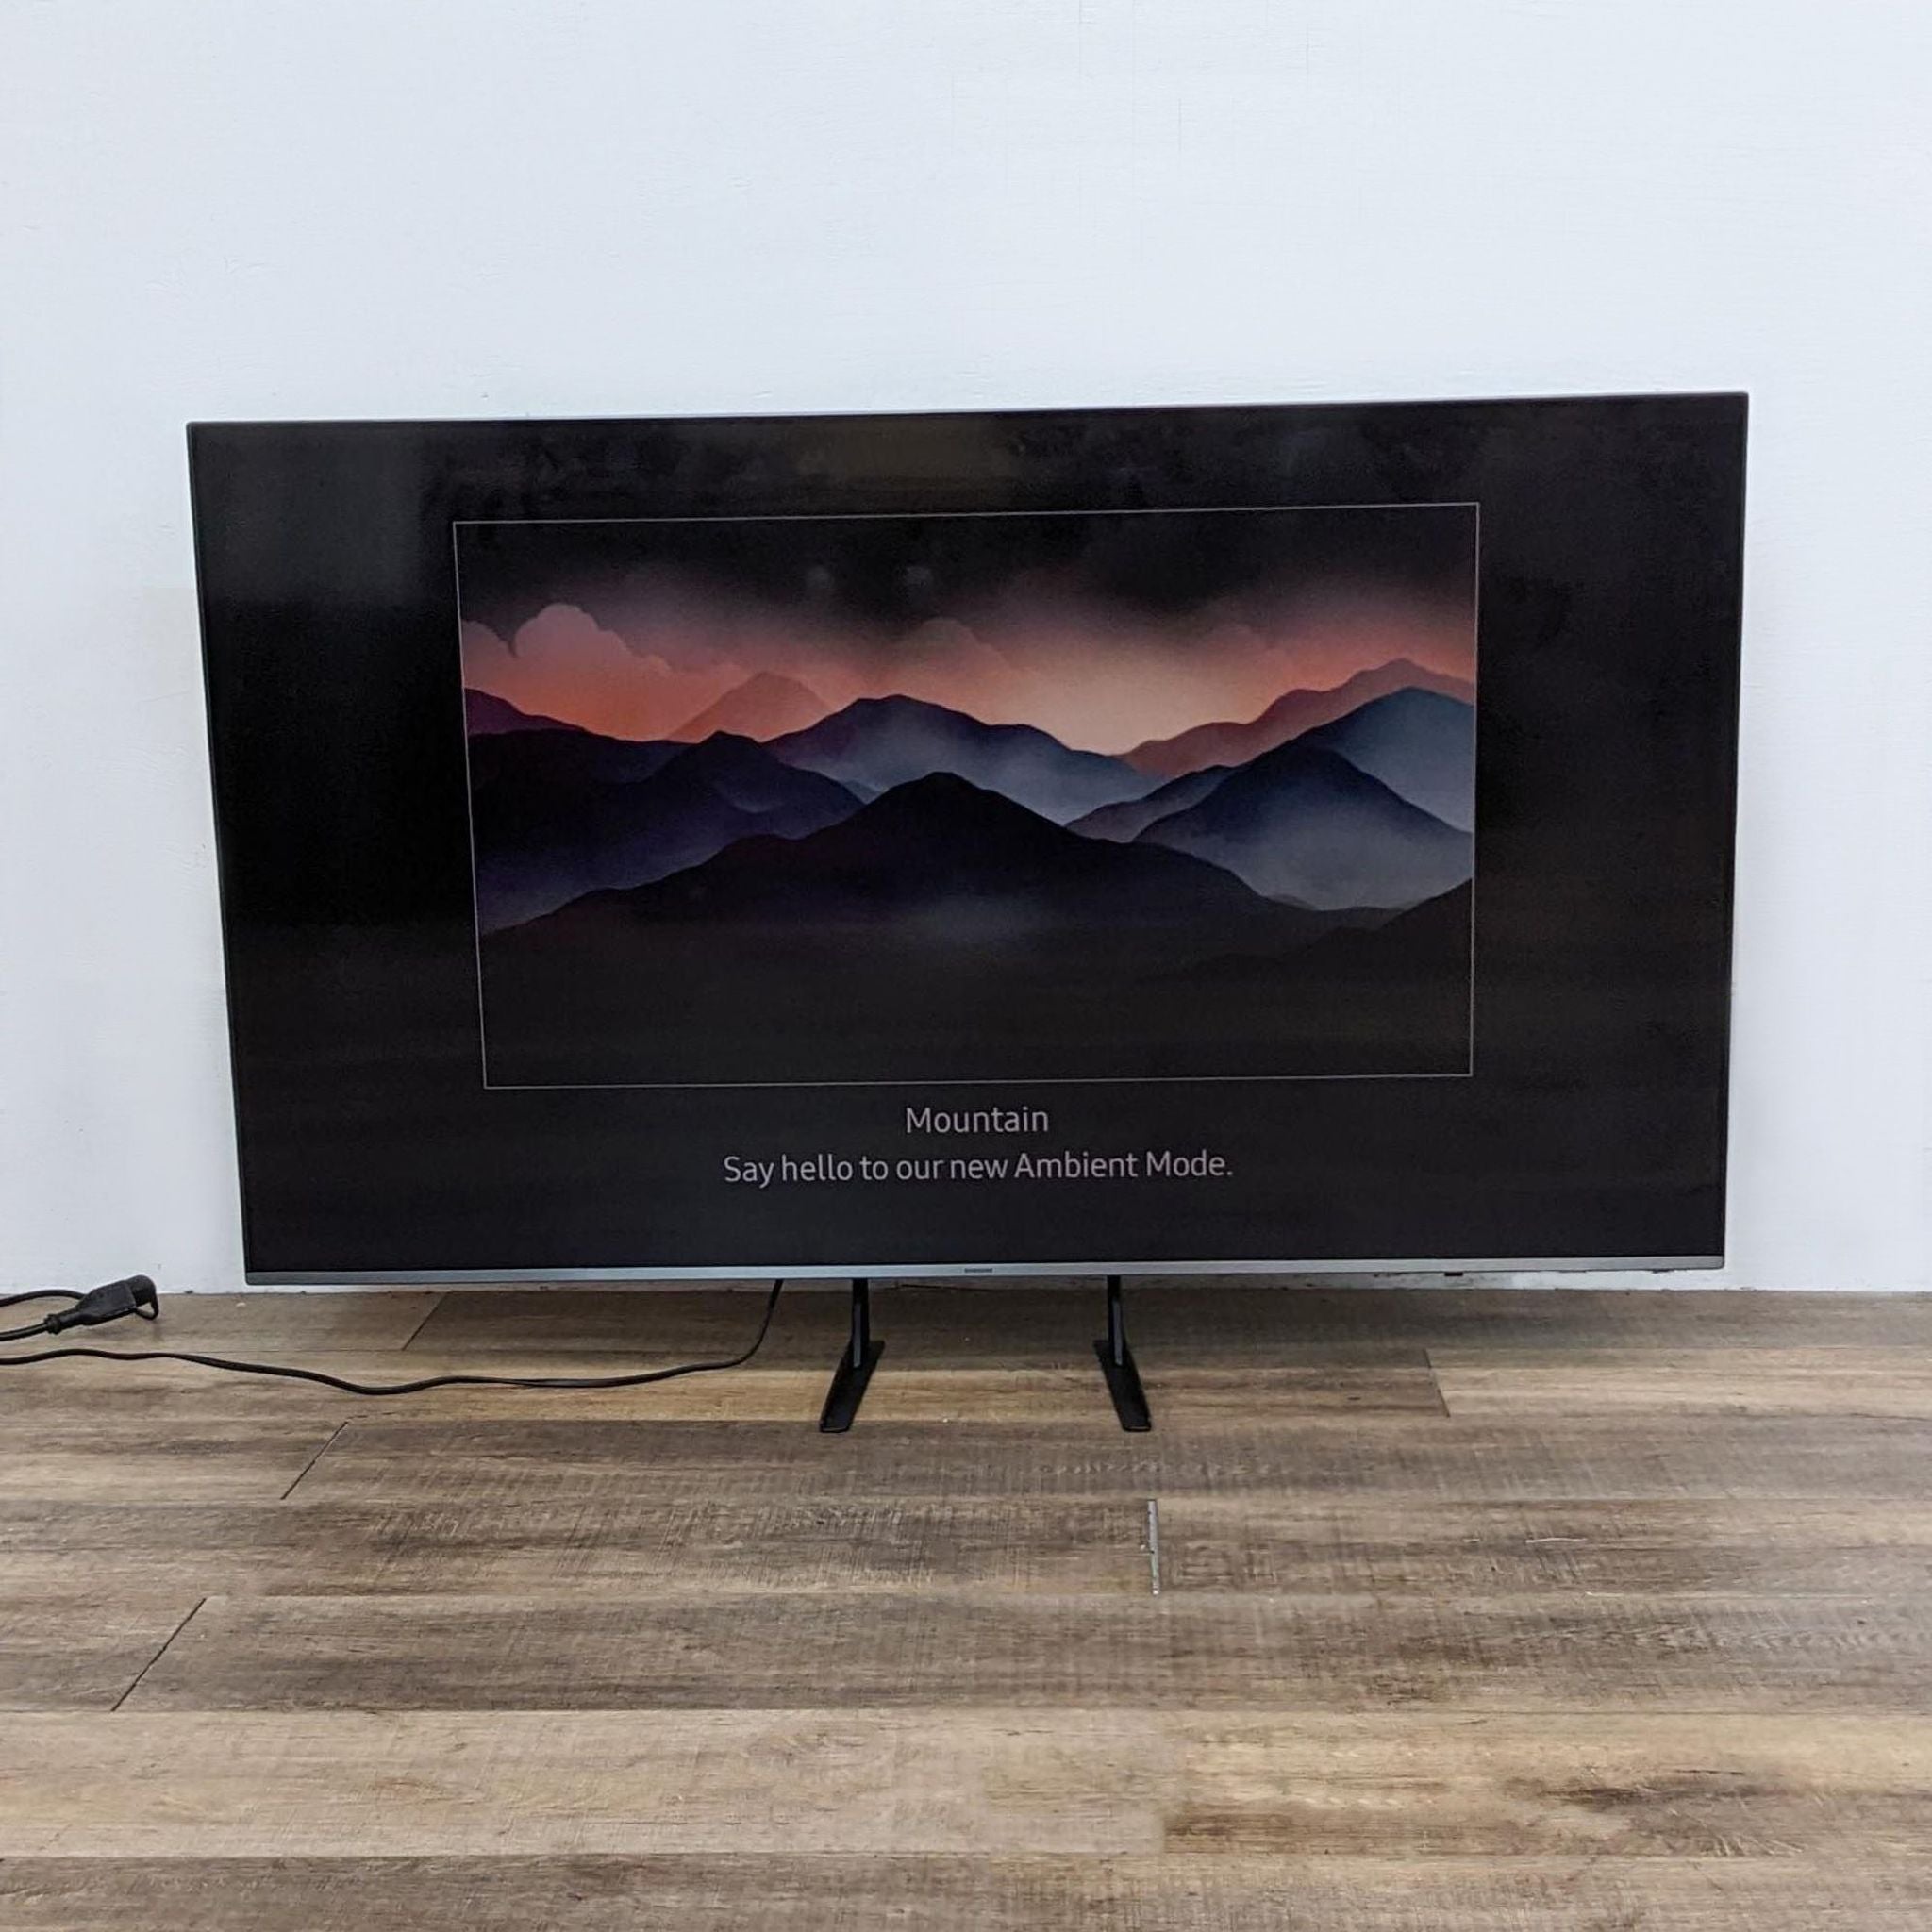 2. Samsung television showcasing Ambient Mode with a mountain scene on the screen, placed on a wooden floor.